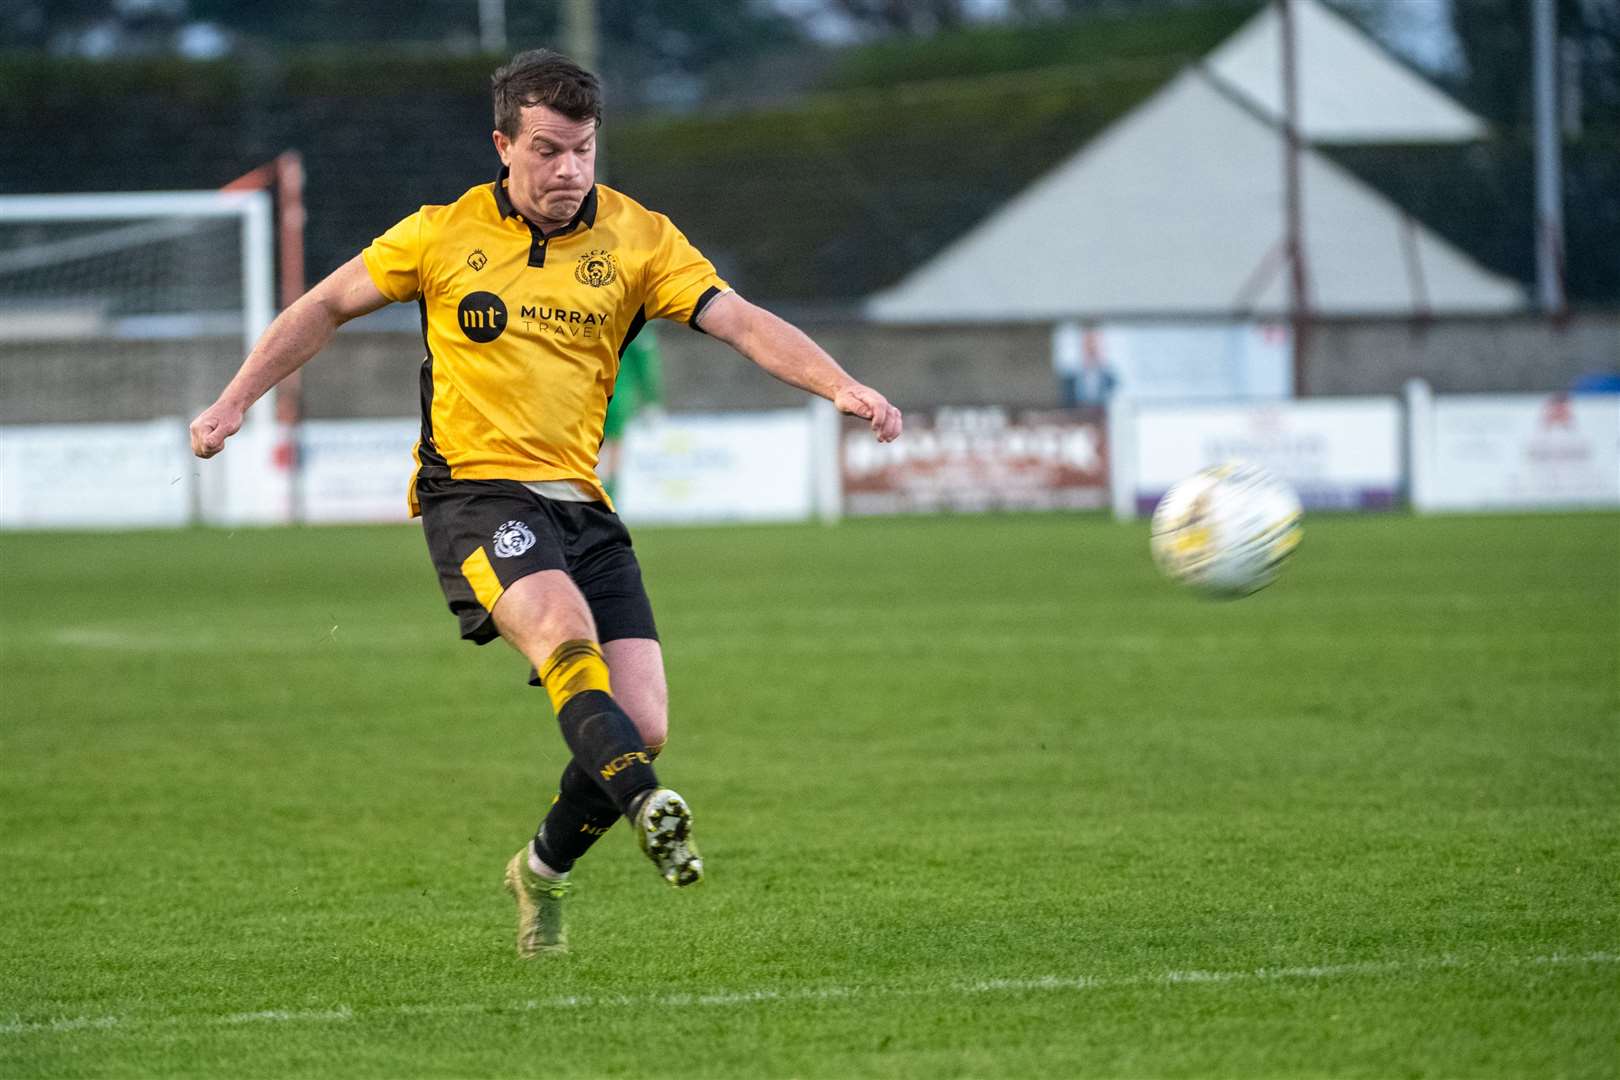 Conor Gethins is three goals short of the 200 mark for Nairn County. Picture: Callum Mackay